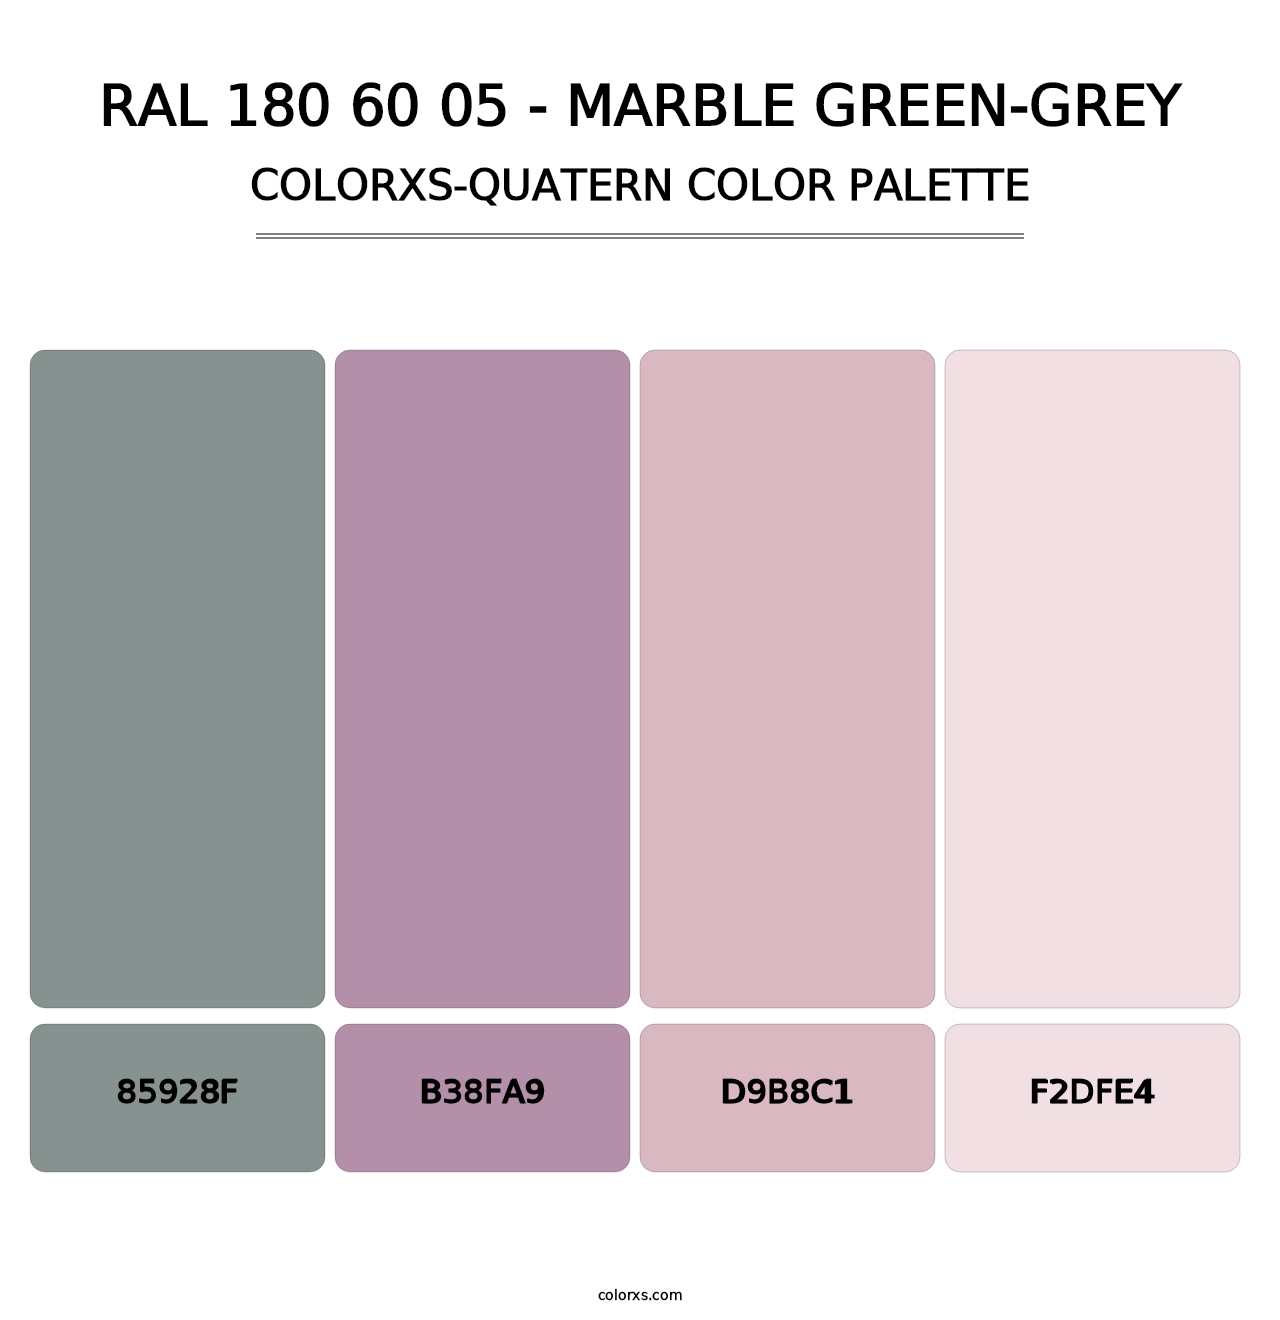 RAL 180 60 05 - Marble Green-Grey - Colorxs Quatern Palette